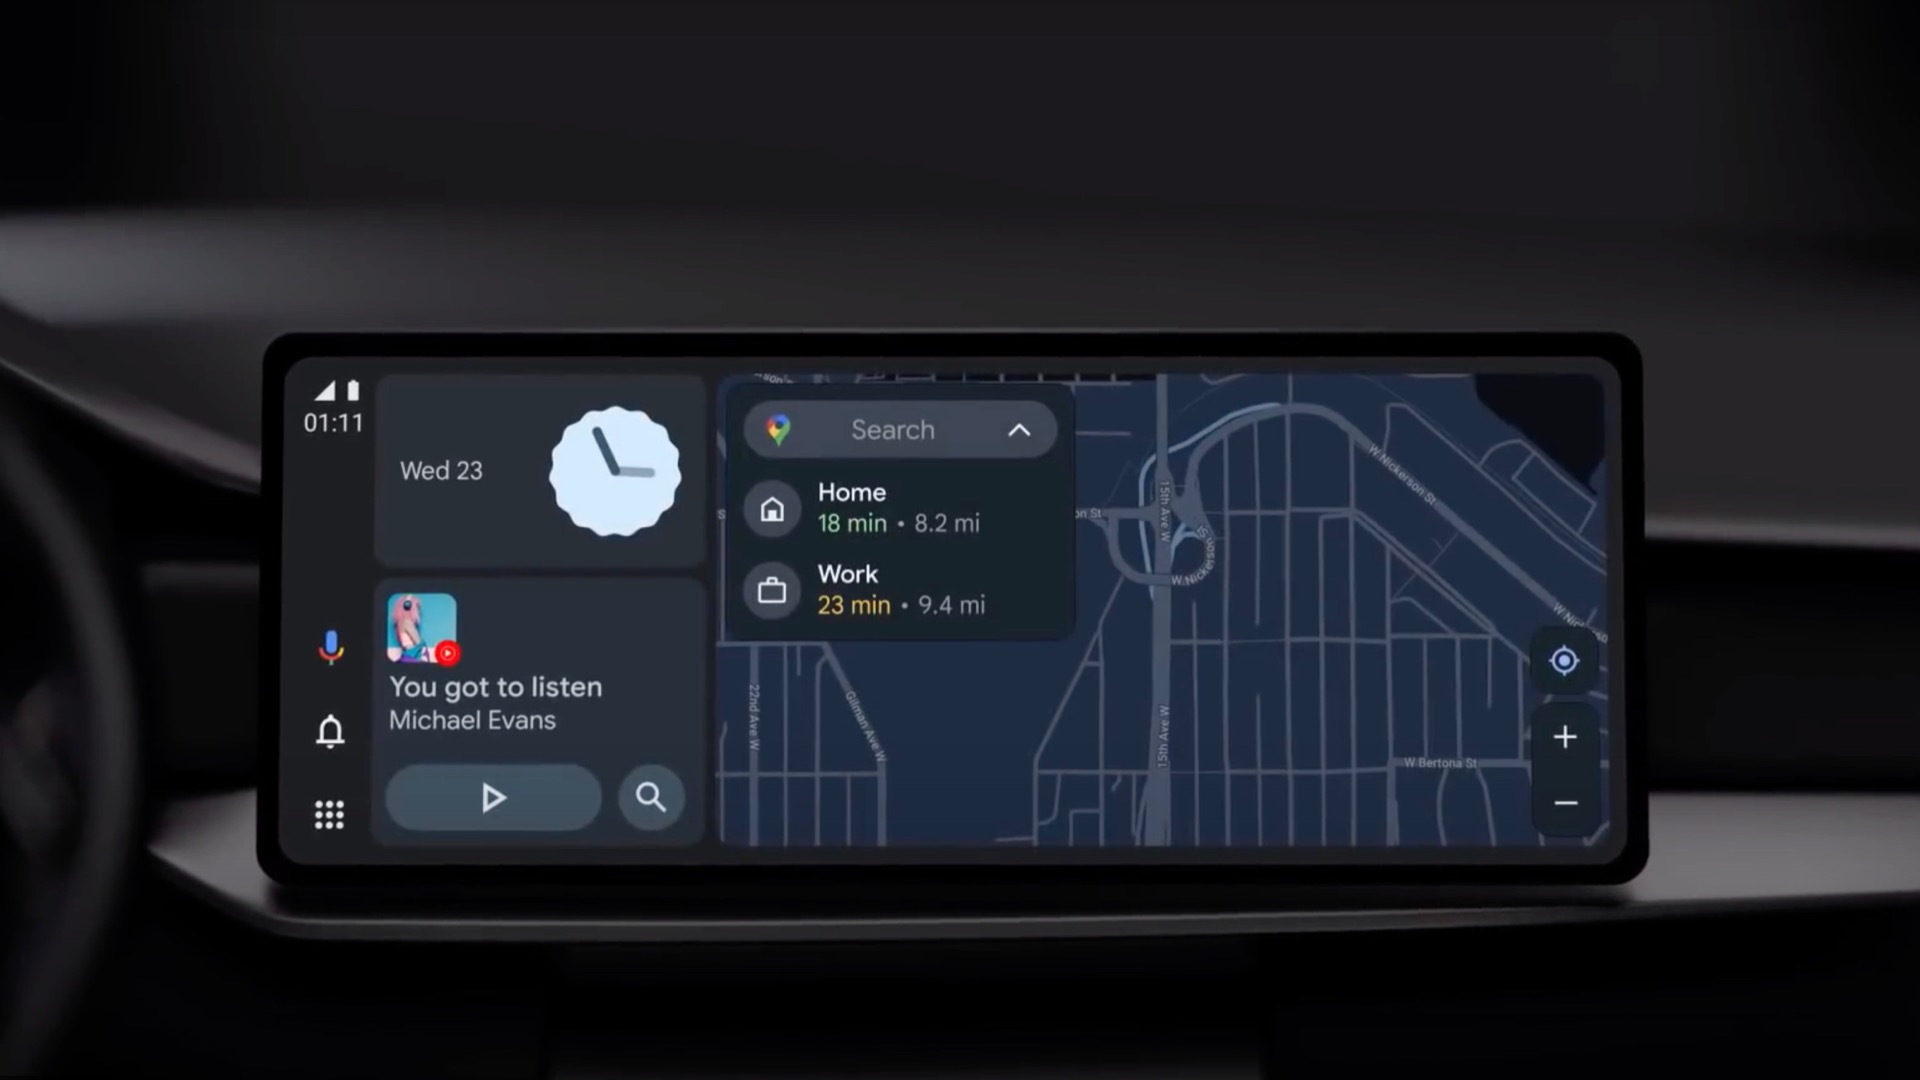 Android Auto split-screen view